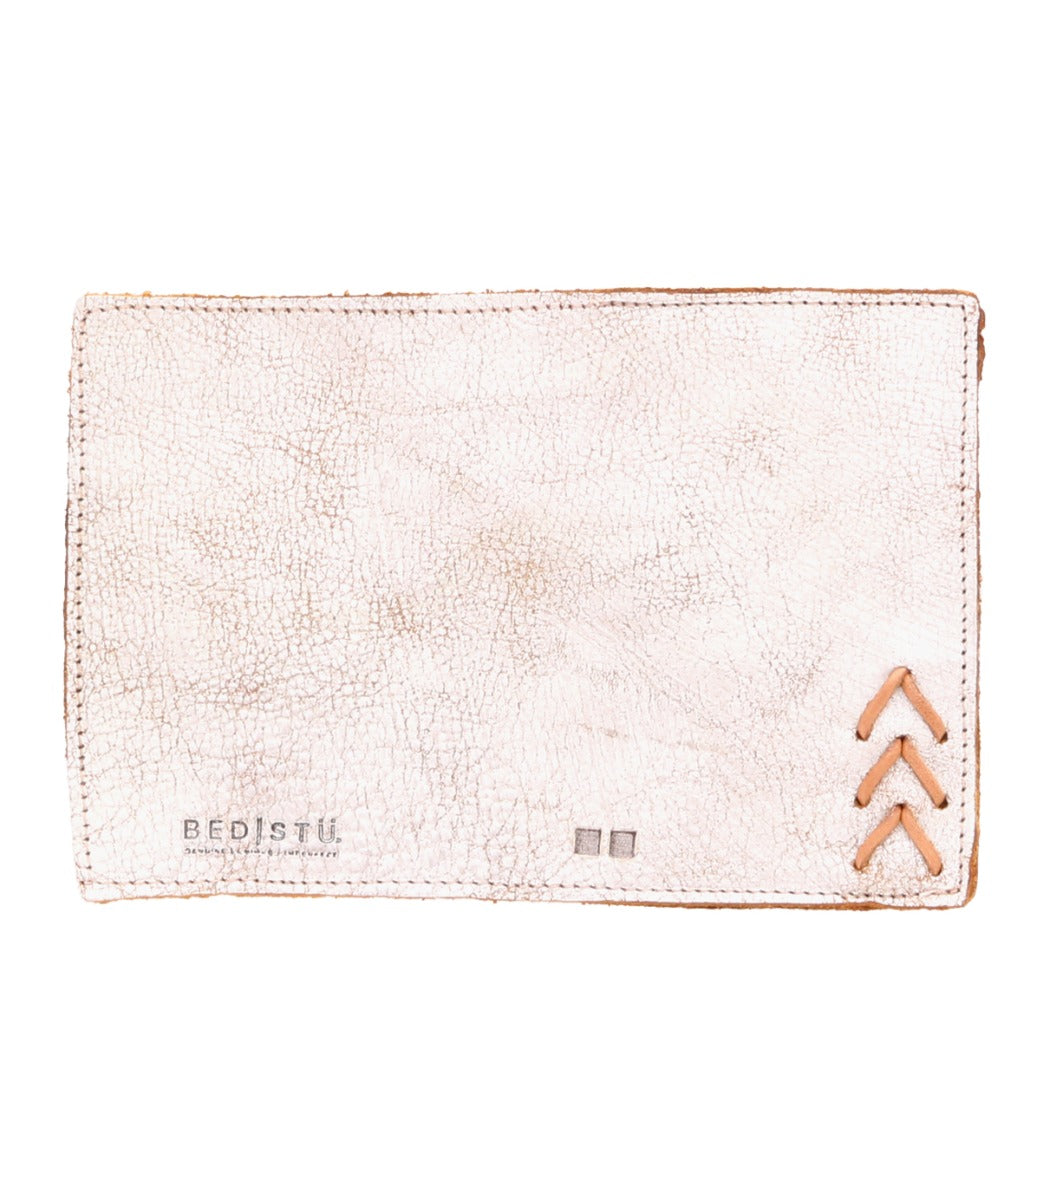 A white leather Stardust wallet with an arrow on it from Bed Stu.